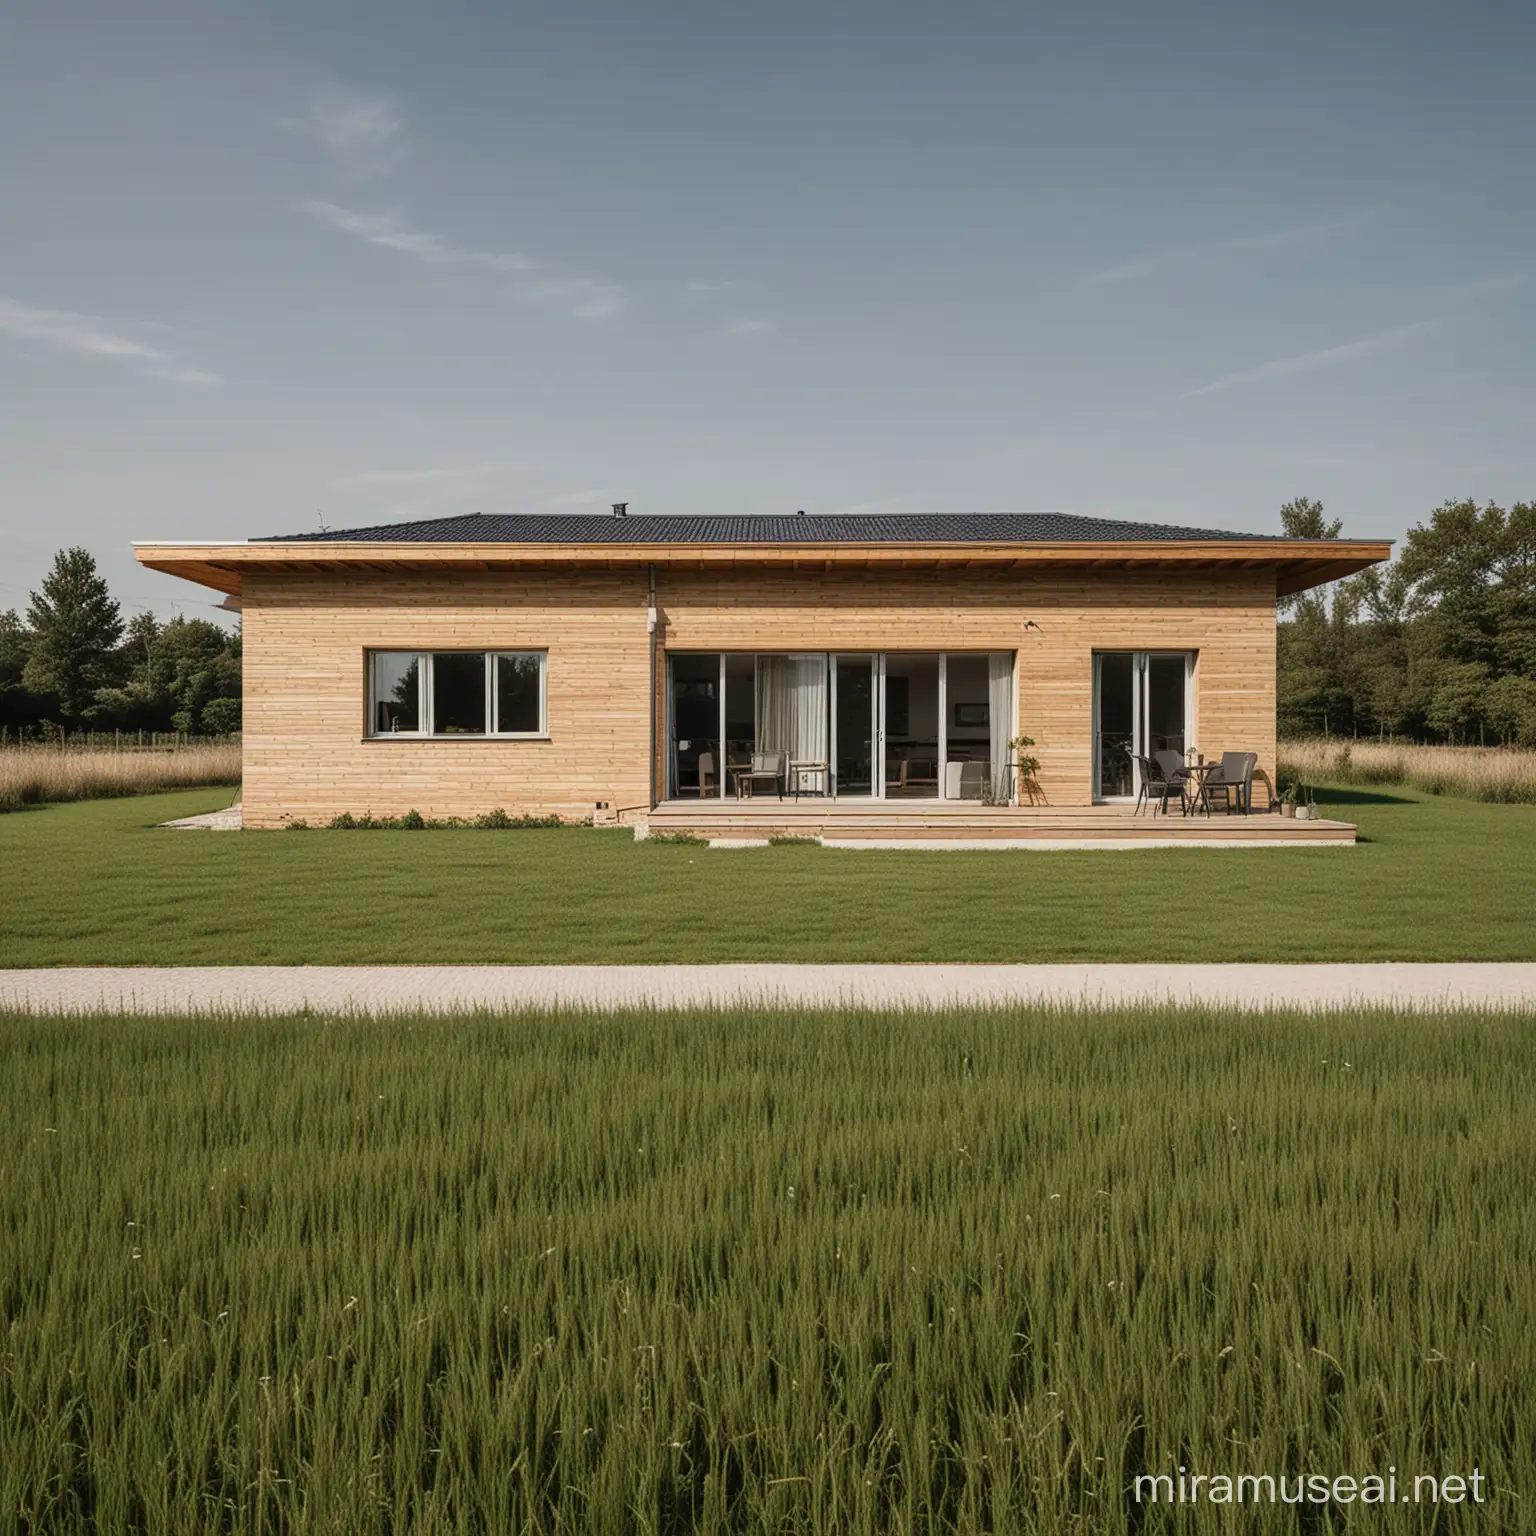 Rural OneStorey House Surrounded by Vast Fields